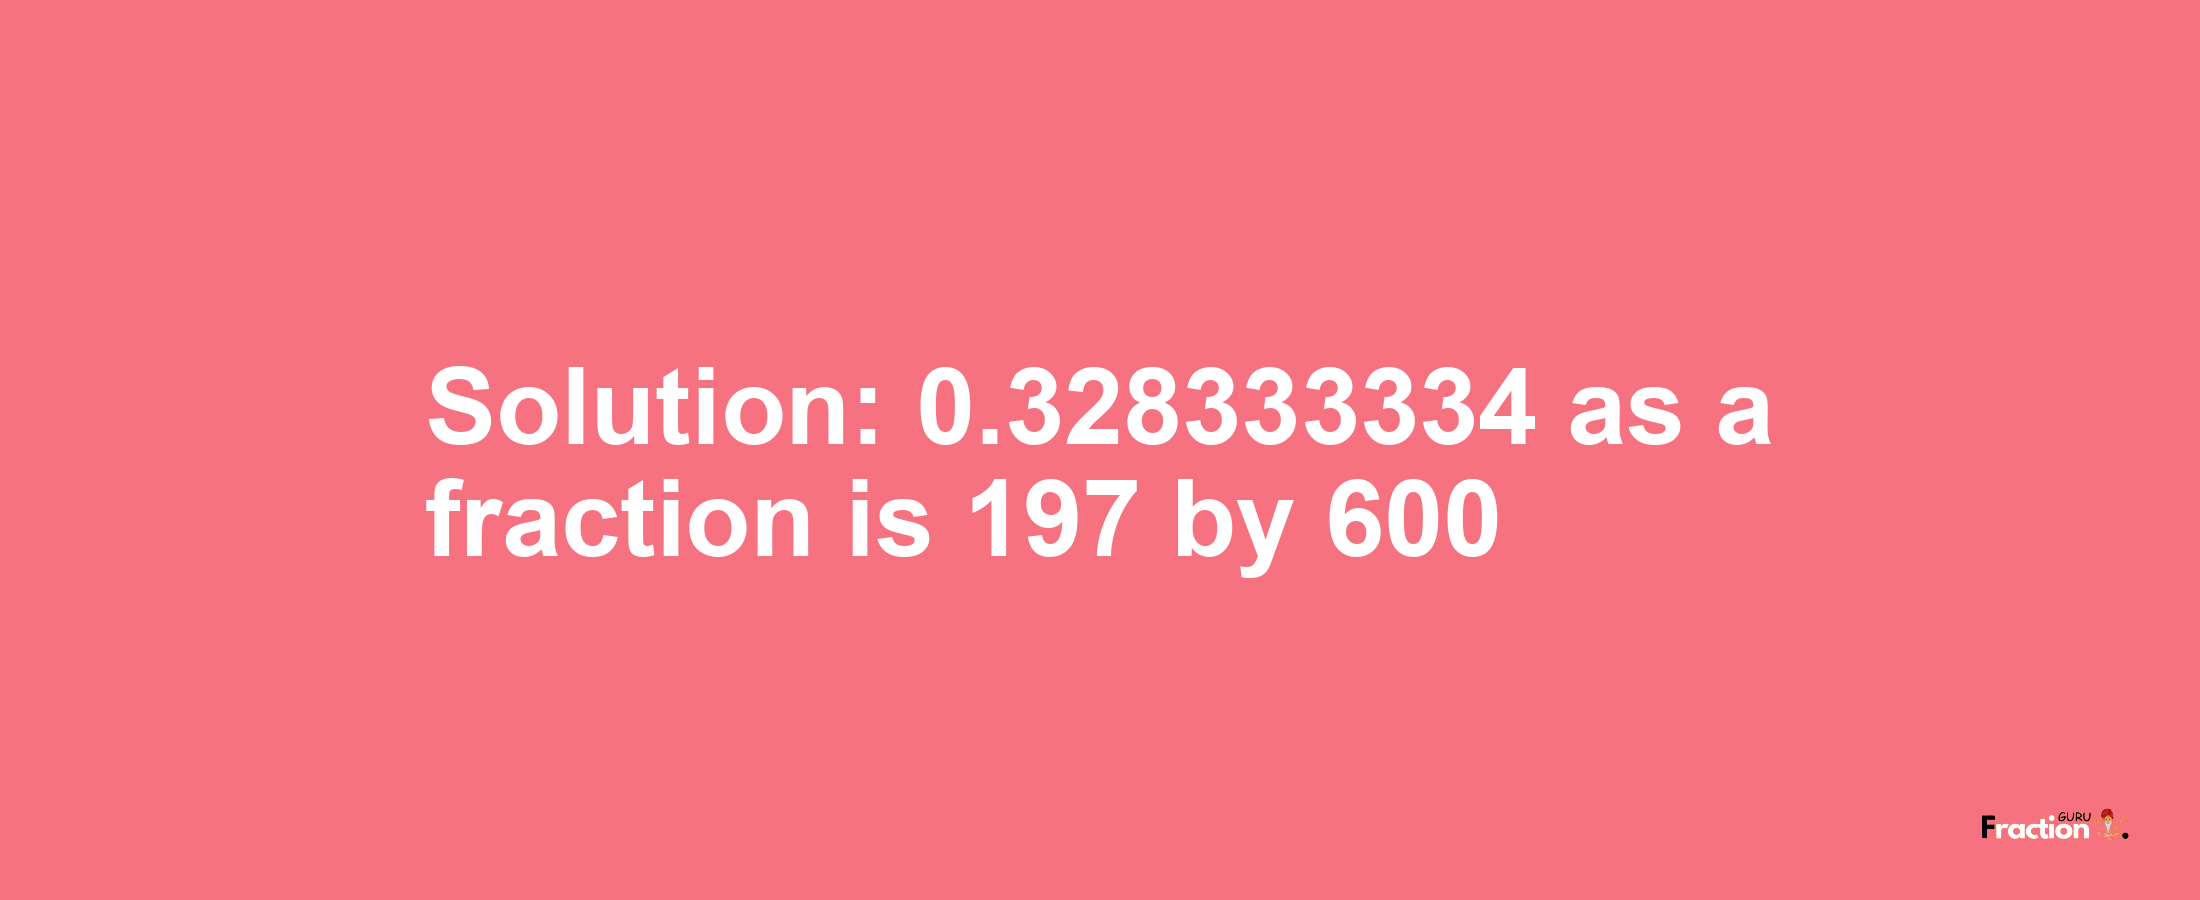 Solution:0.328333334 as a fraction is 197/600